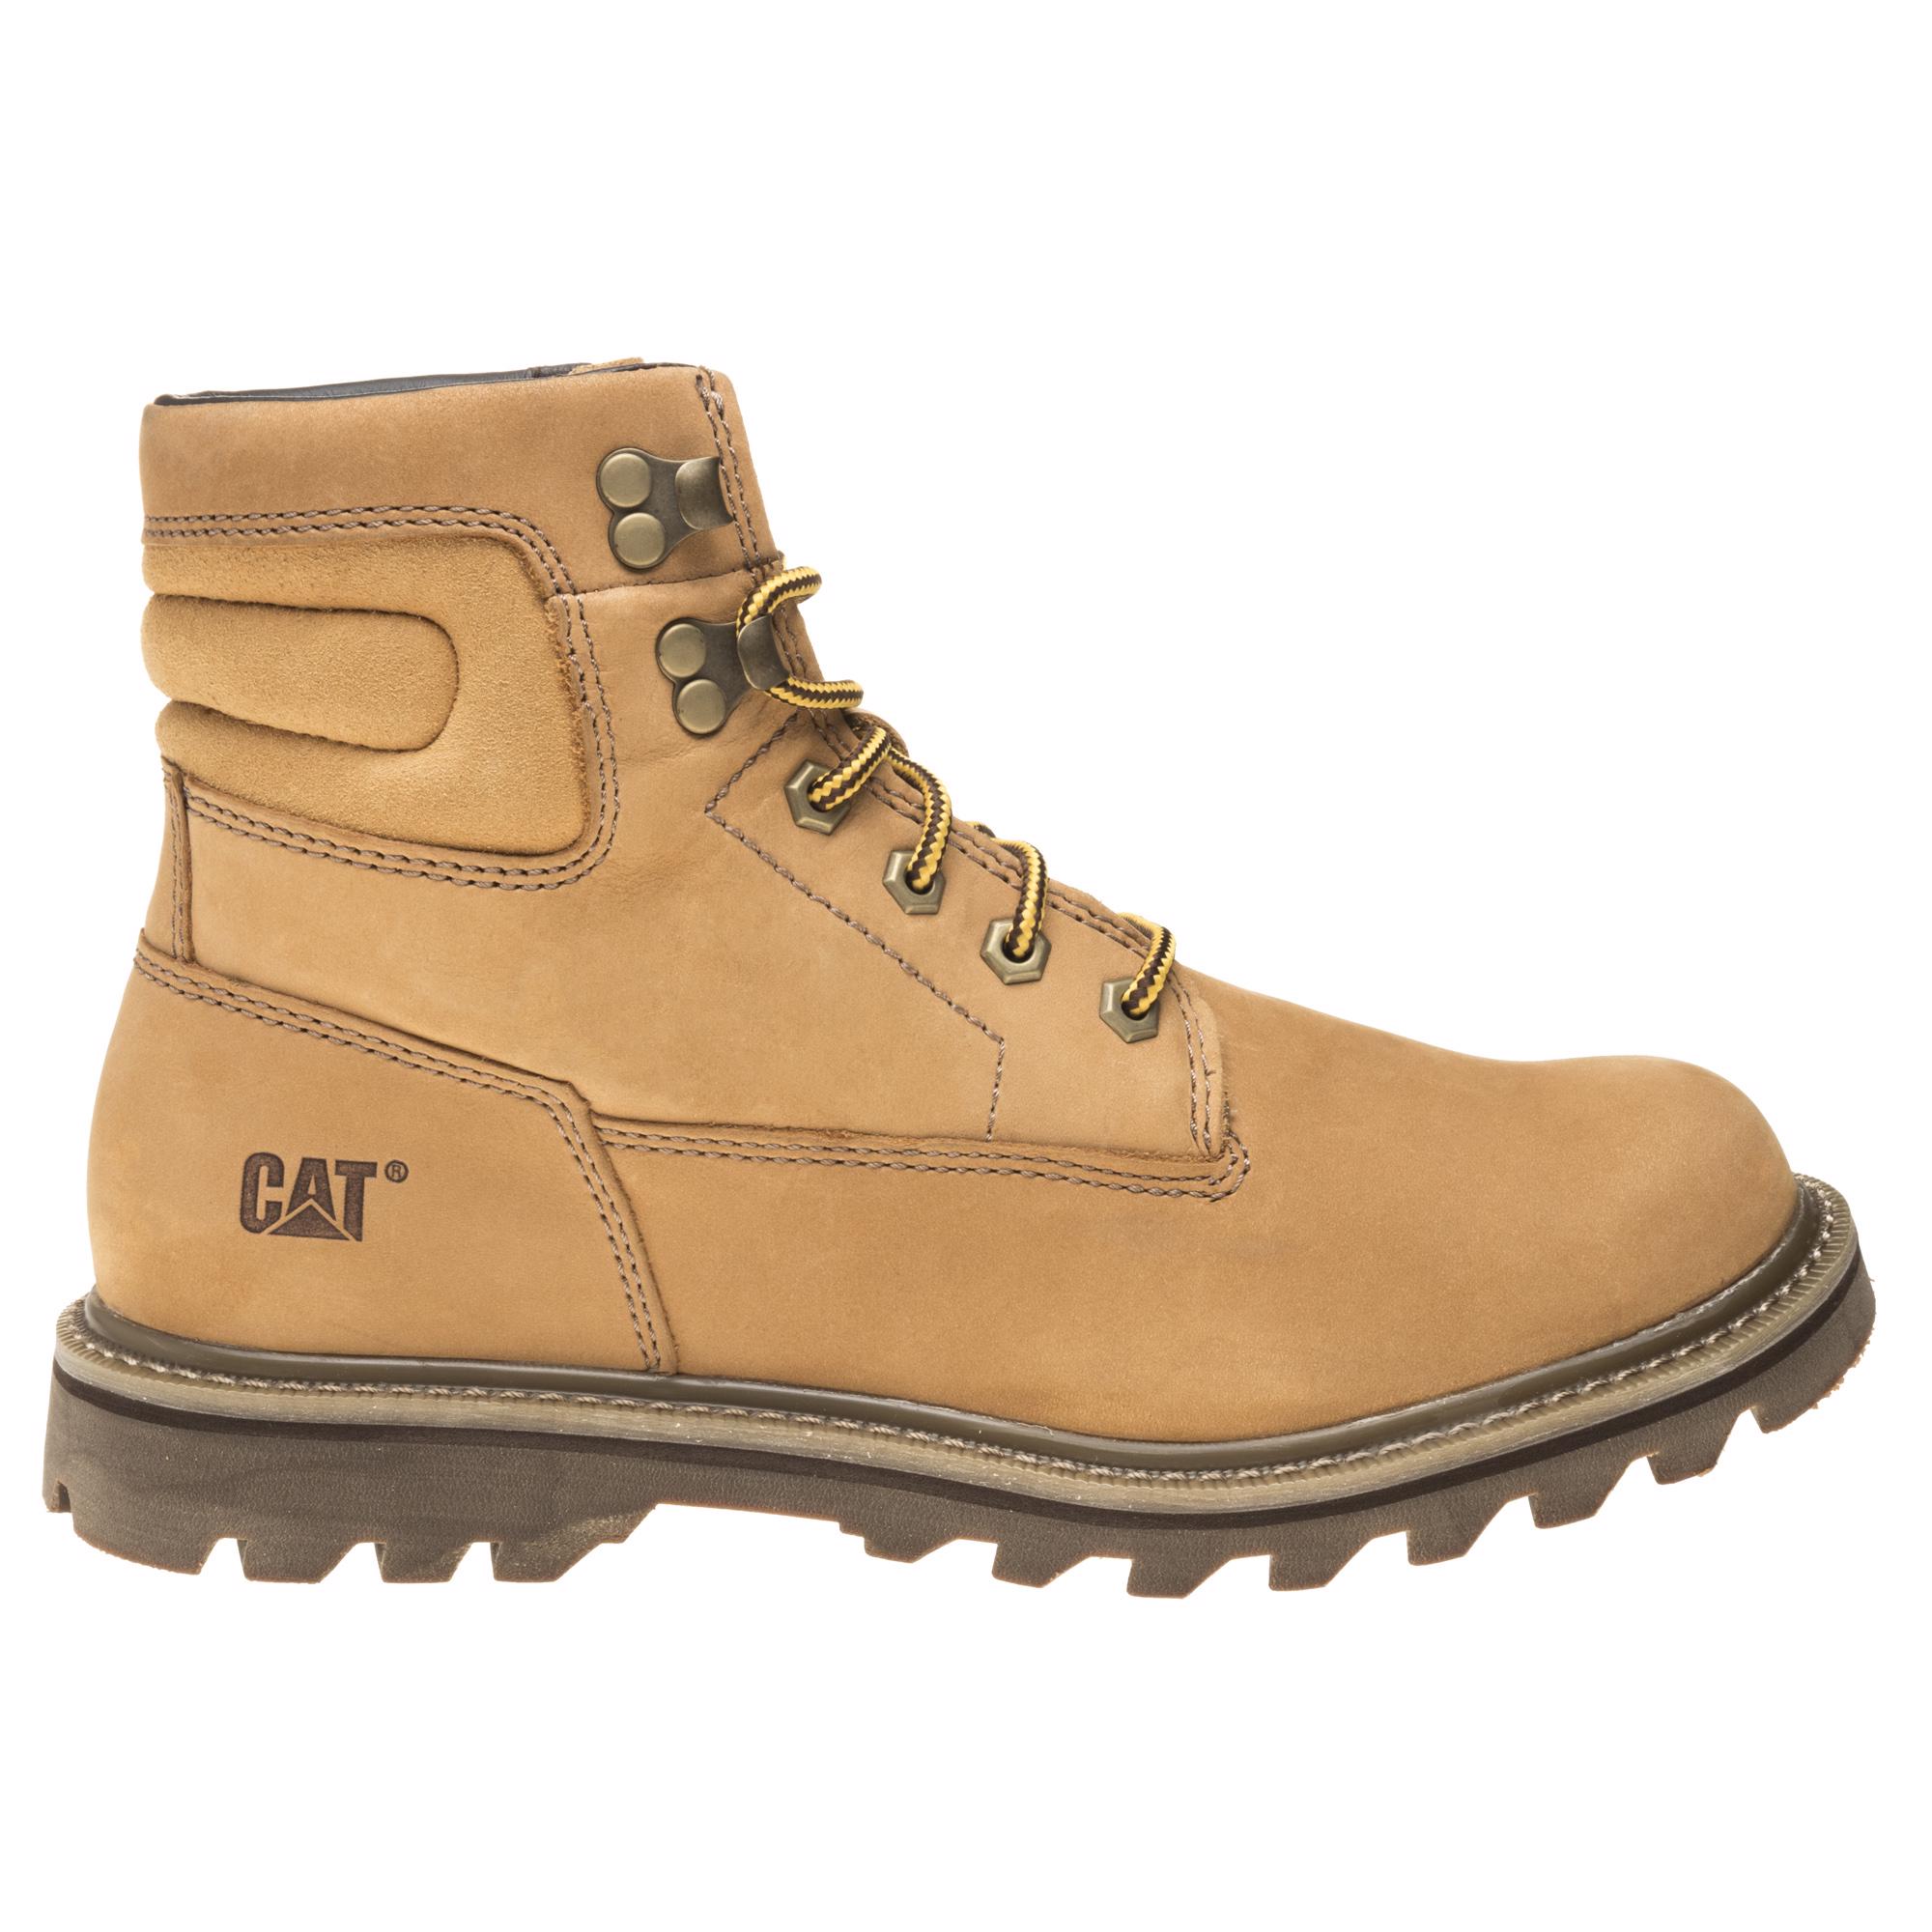 New Mens Caterpillar Tan Wireline Nubuck Boots Ankle Lace Up 